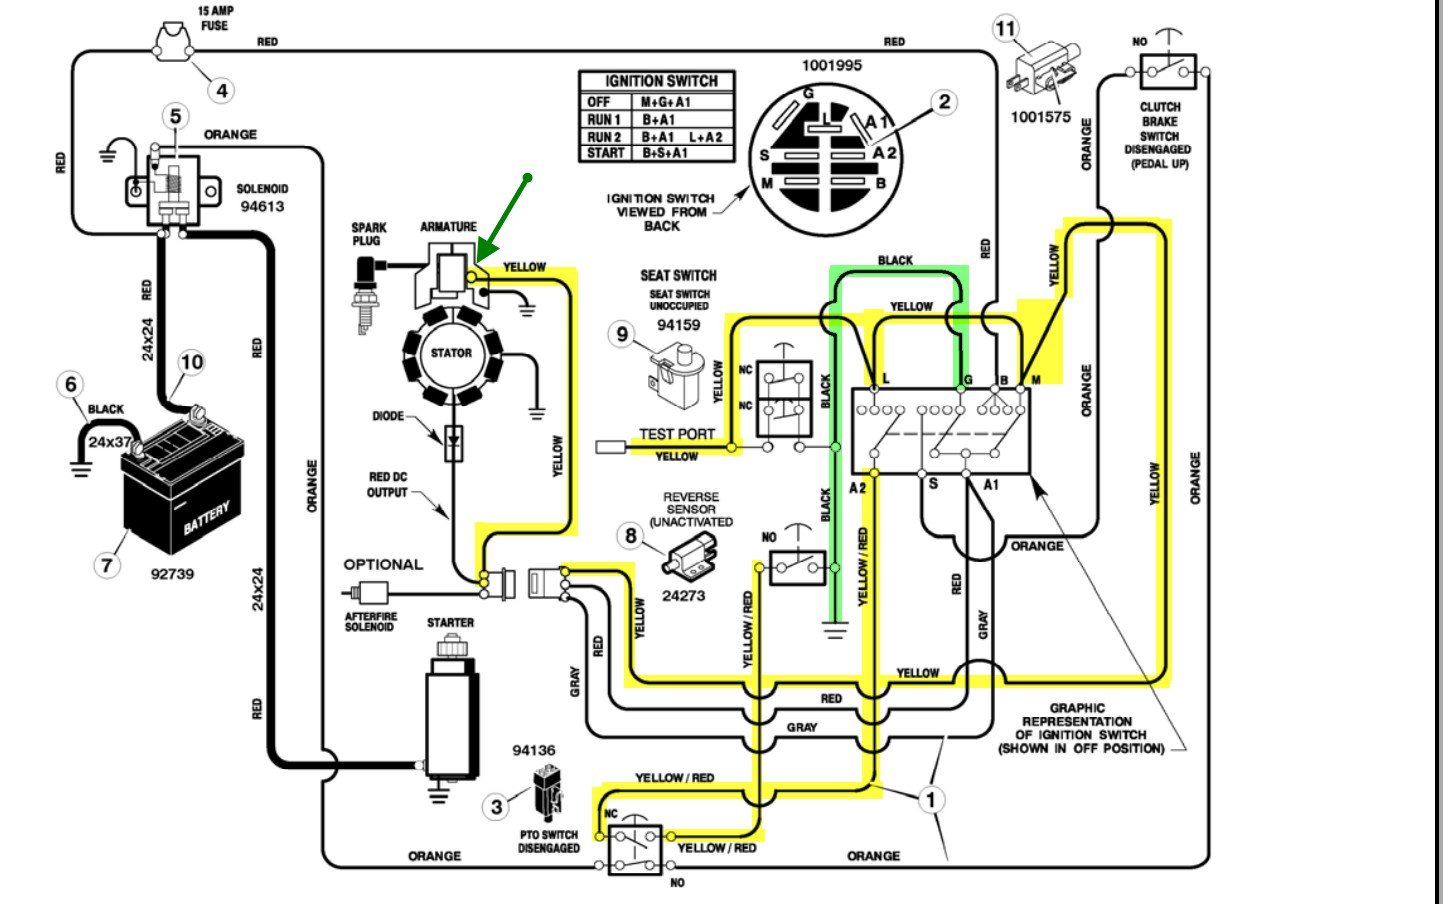 Briggs And Stratton Ignition Coil Wiring Diagram | Wiring Diagram - Briggs And Stratton Magneto Wiring Diagram